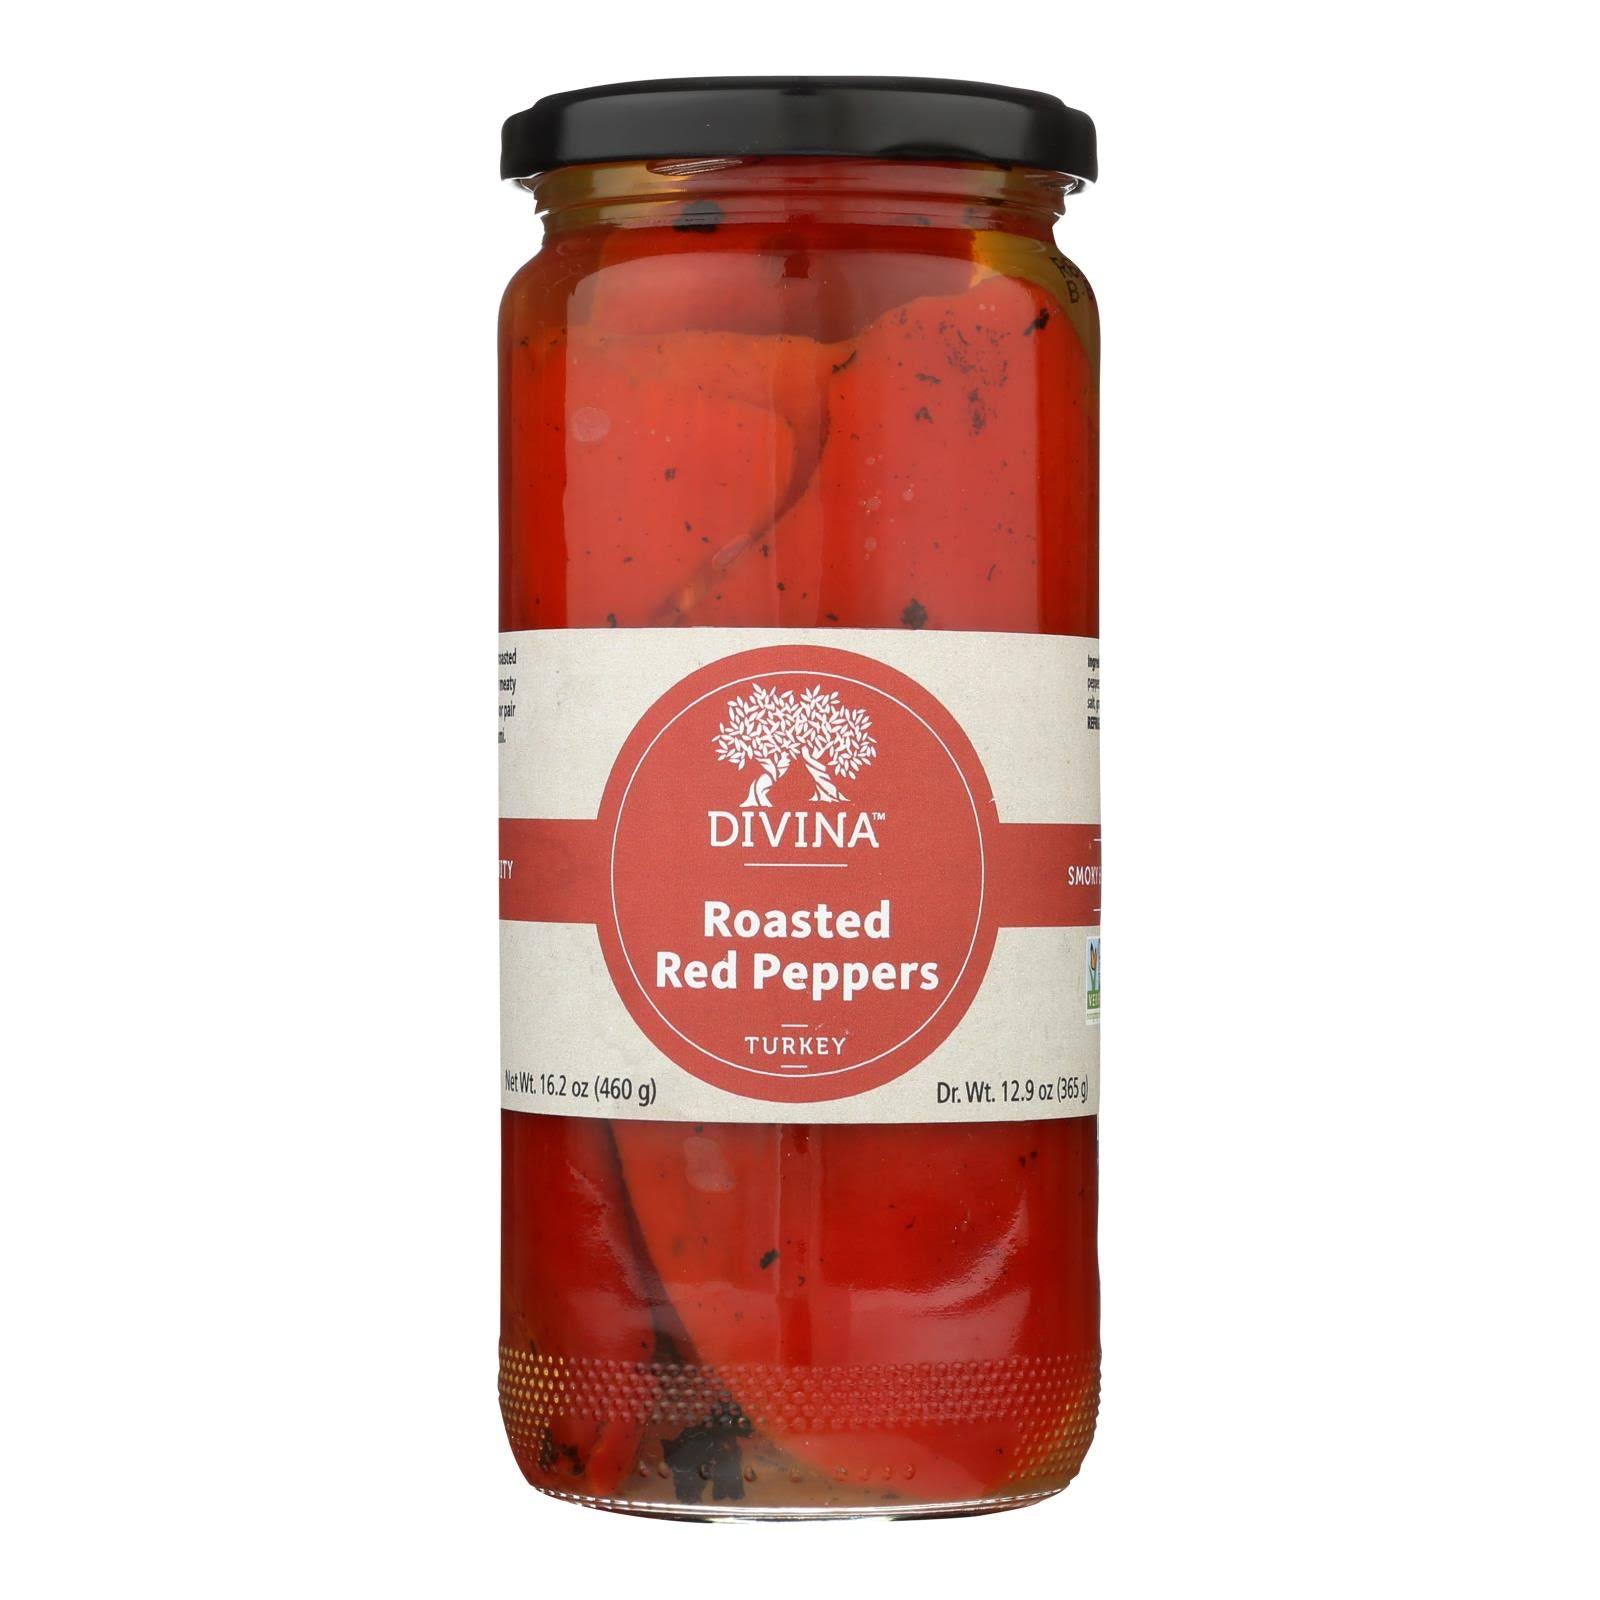 Divina Roasted Sweet Peppers - 480g